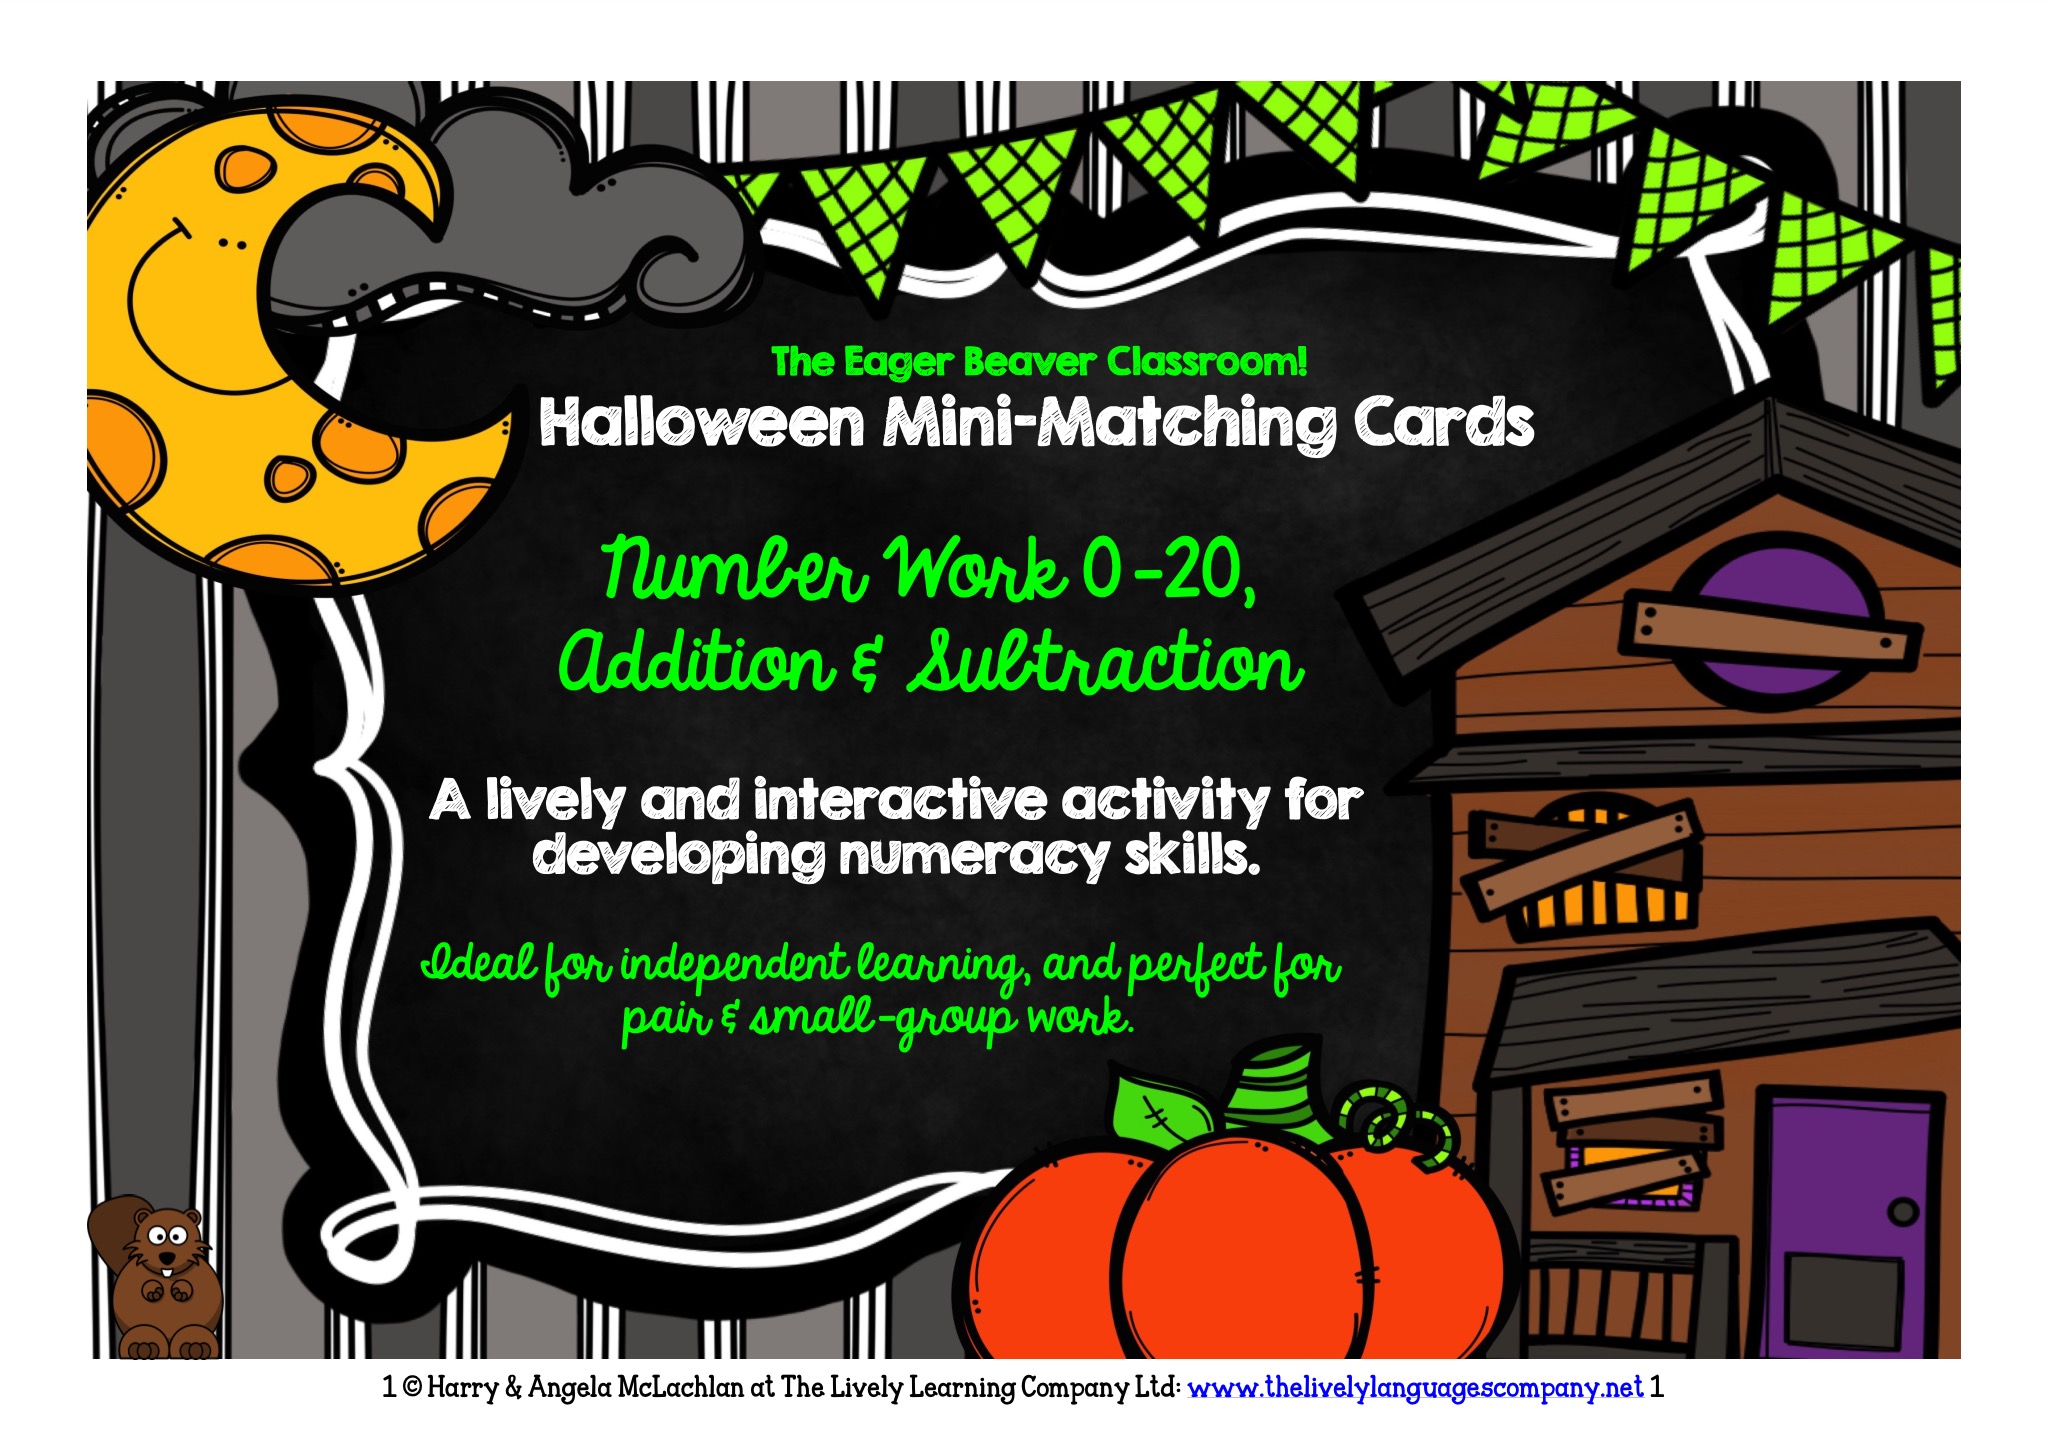 Halloween Mini-matching Cards for Number Work - Numbers 0-20, Addition & Subtraction